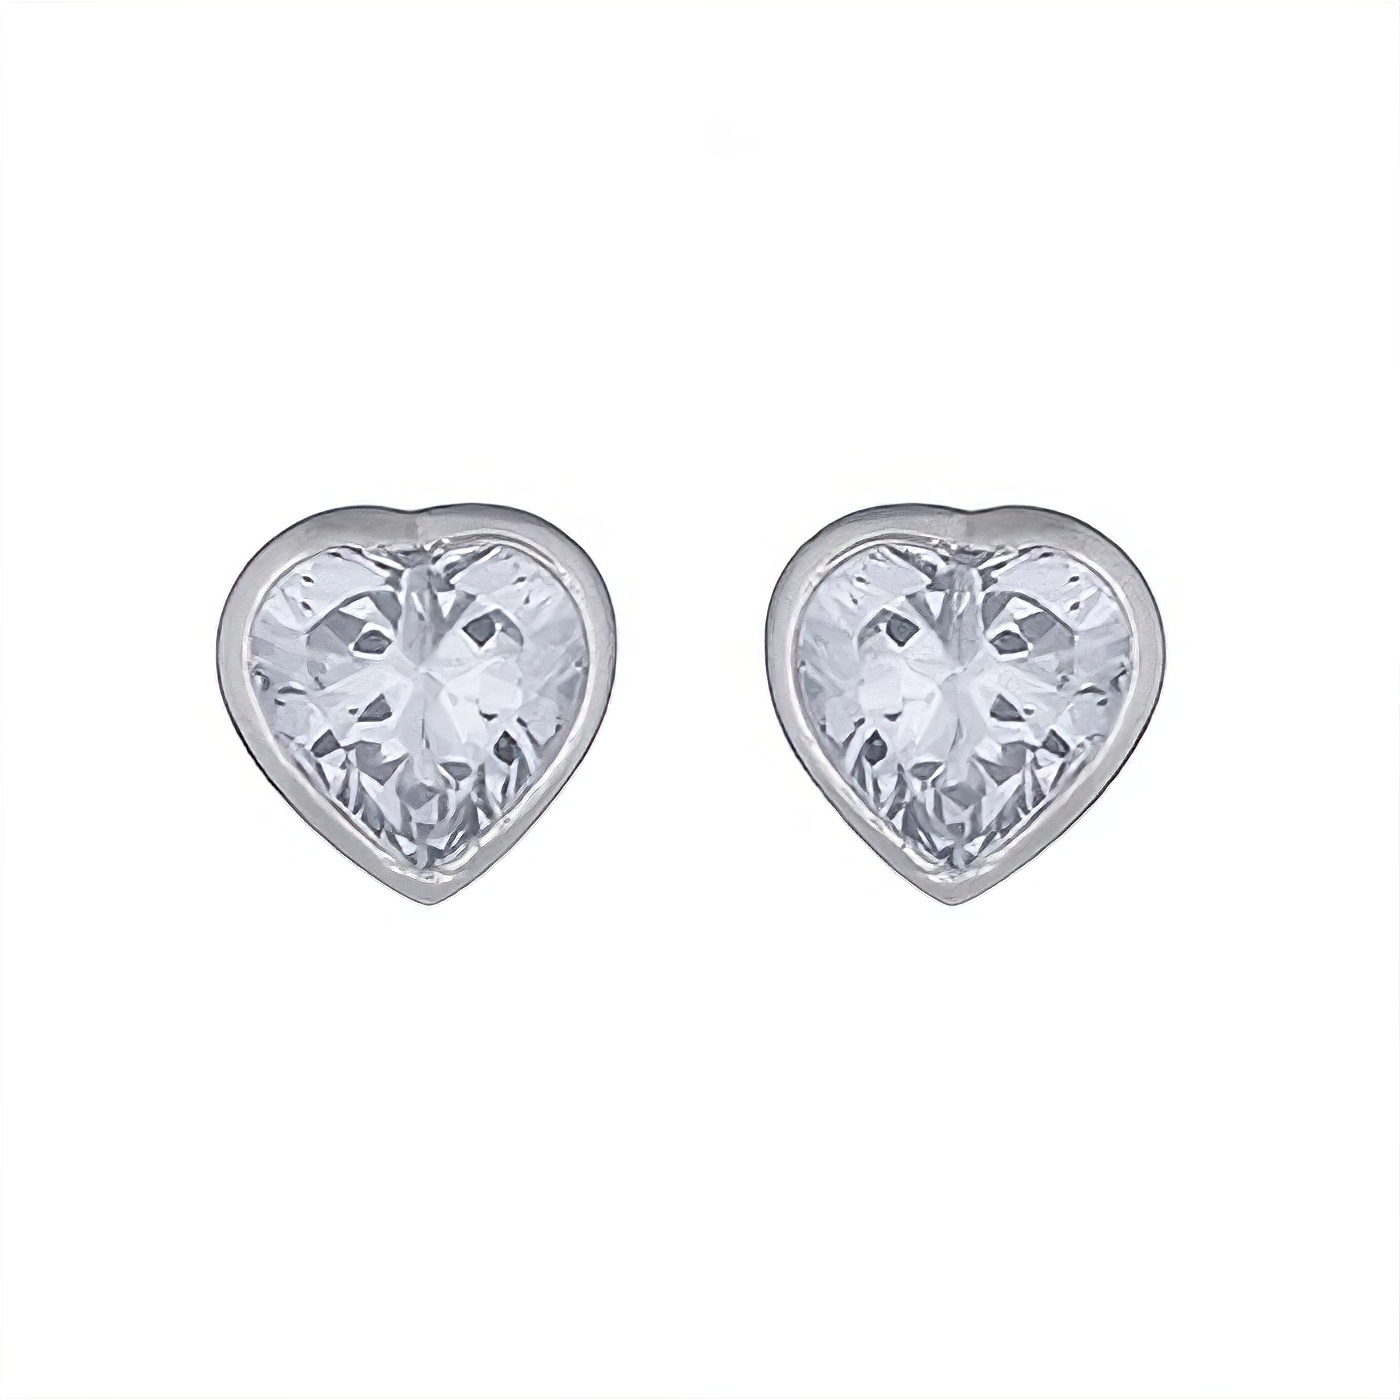 Heart Faceted Clear Cubic Zirconia Stud Earrings by BeYindi 